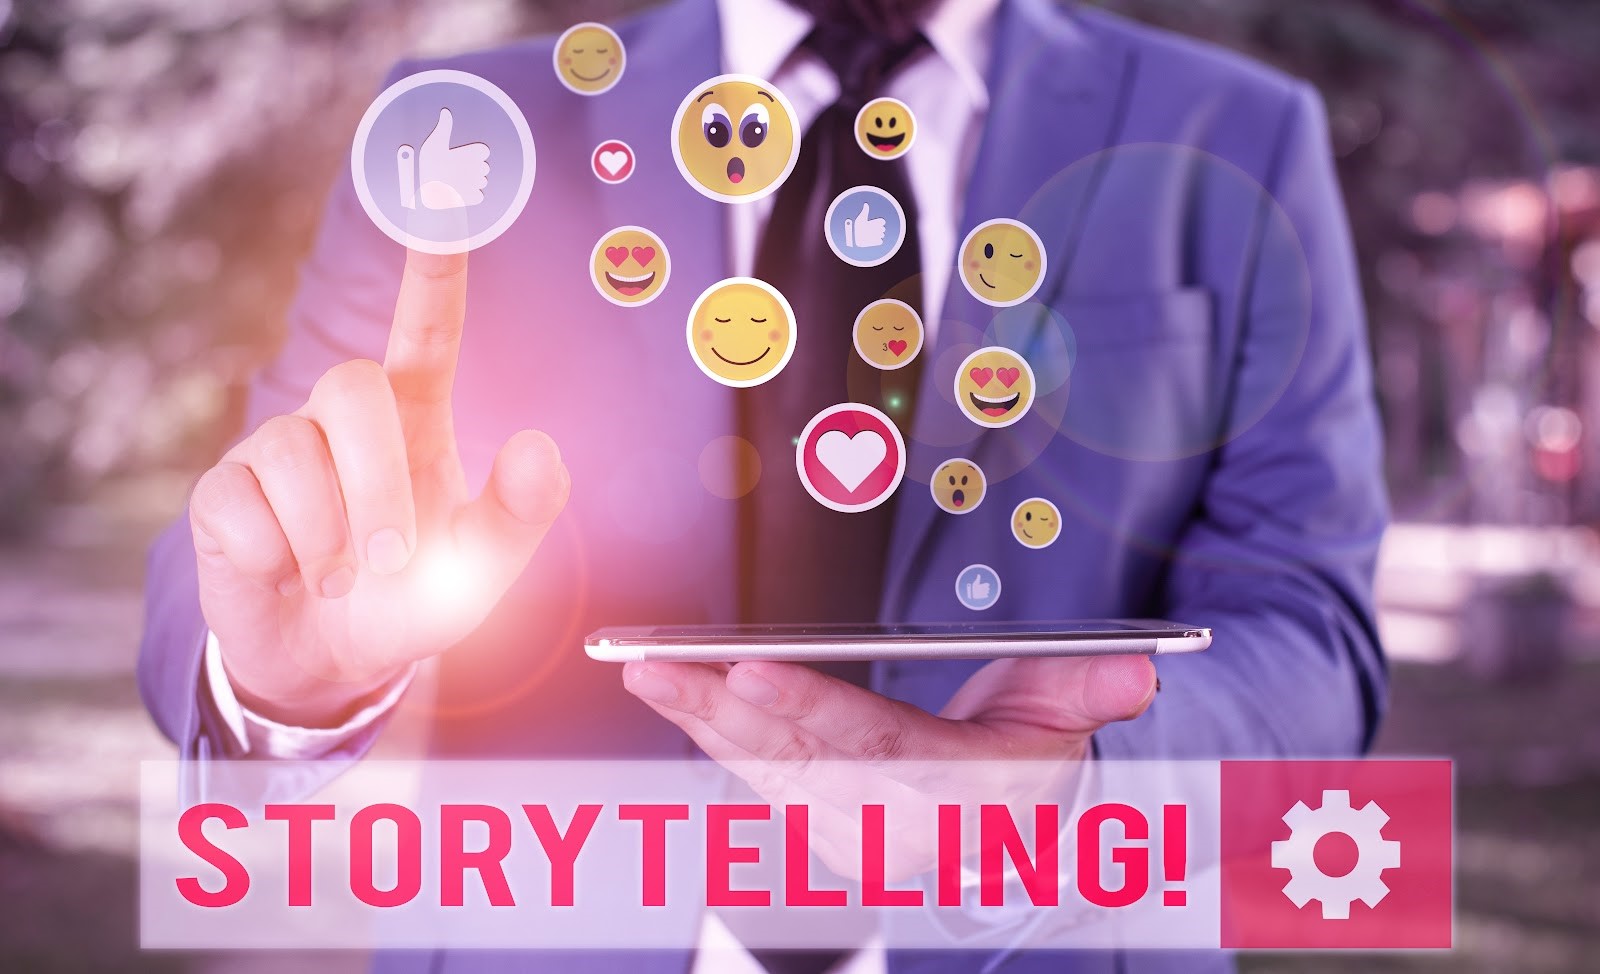 Stock photo of a man in a business suit pointing at emoji reactions to the word "Storytelling" underneath.